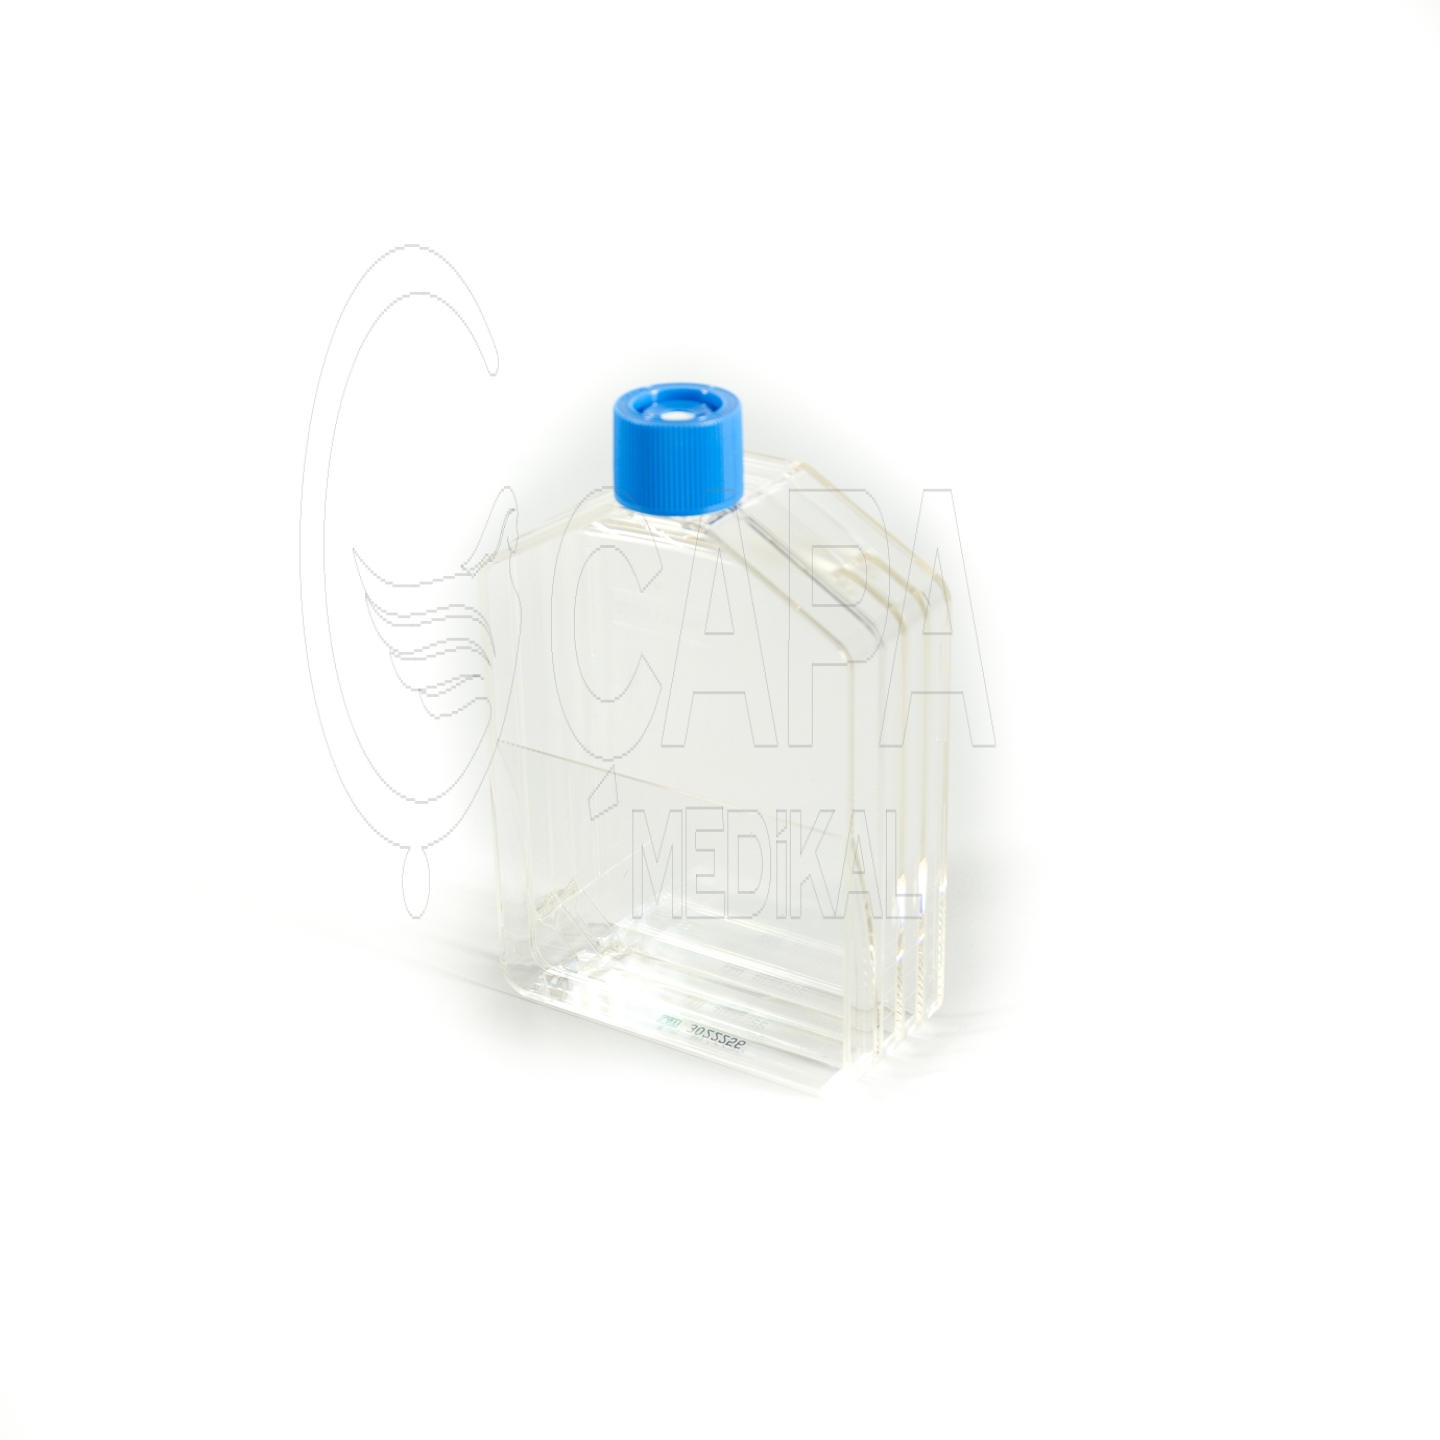 CELL CULTURE FLASK 25 CM2 (50 ML) VENTED